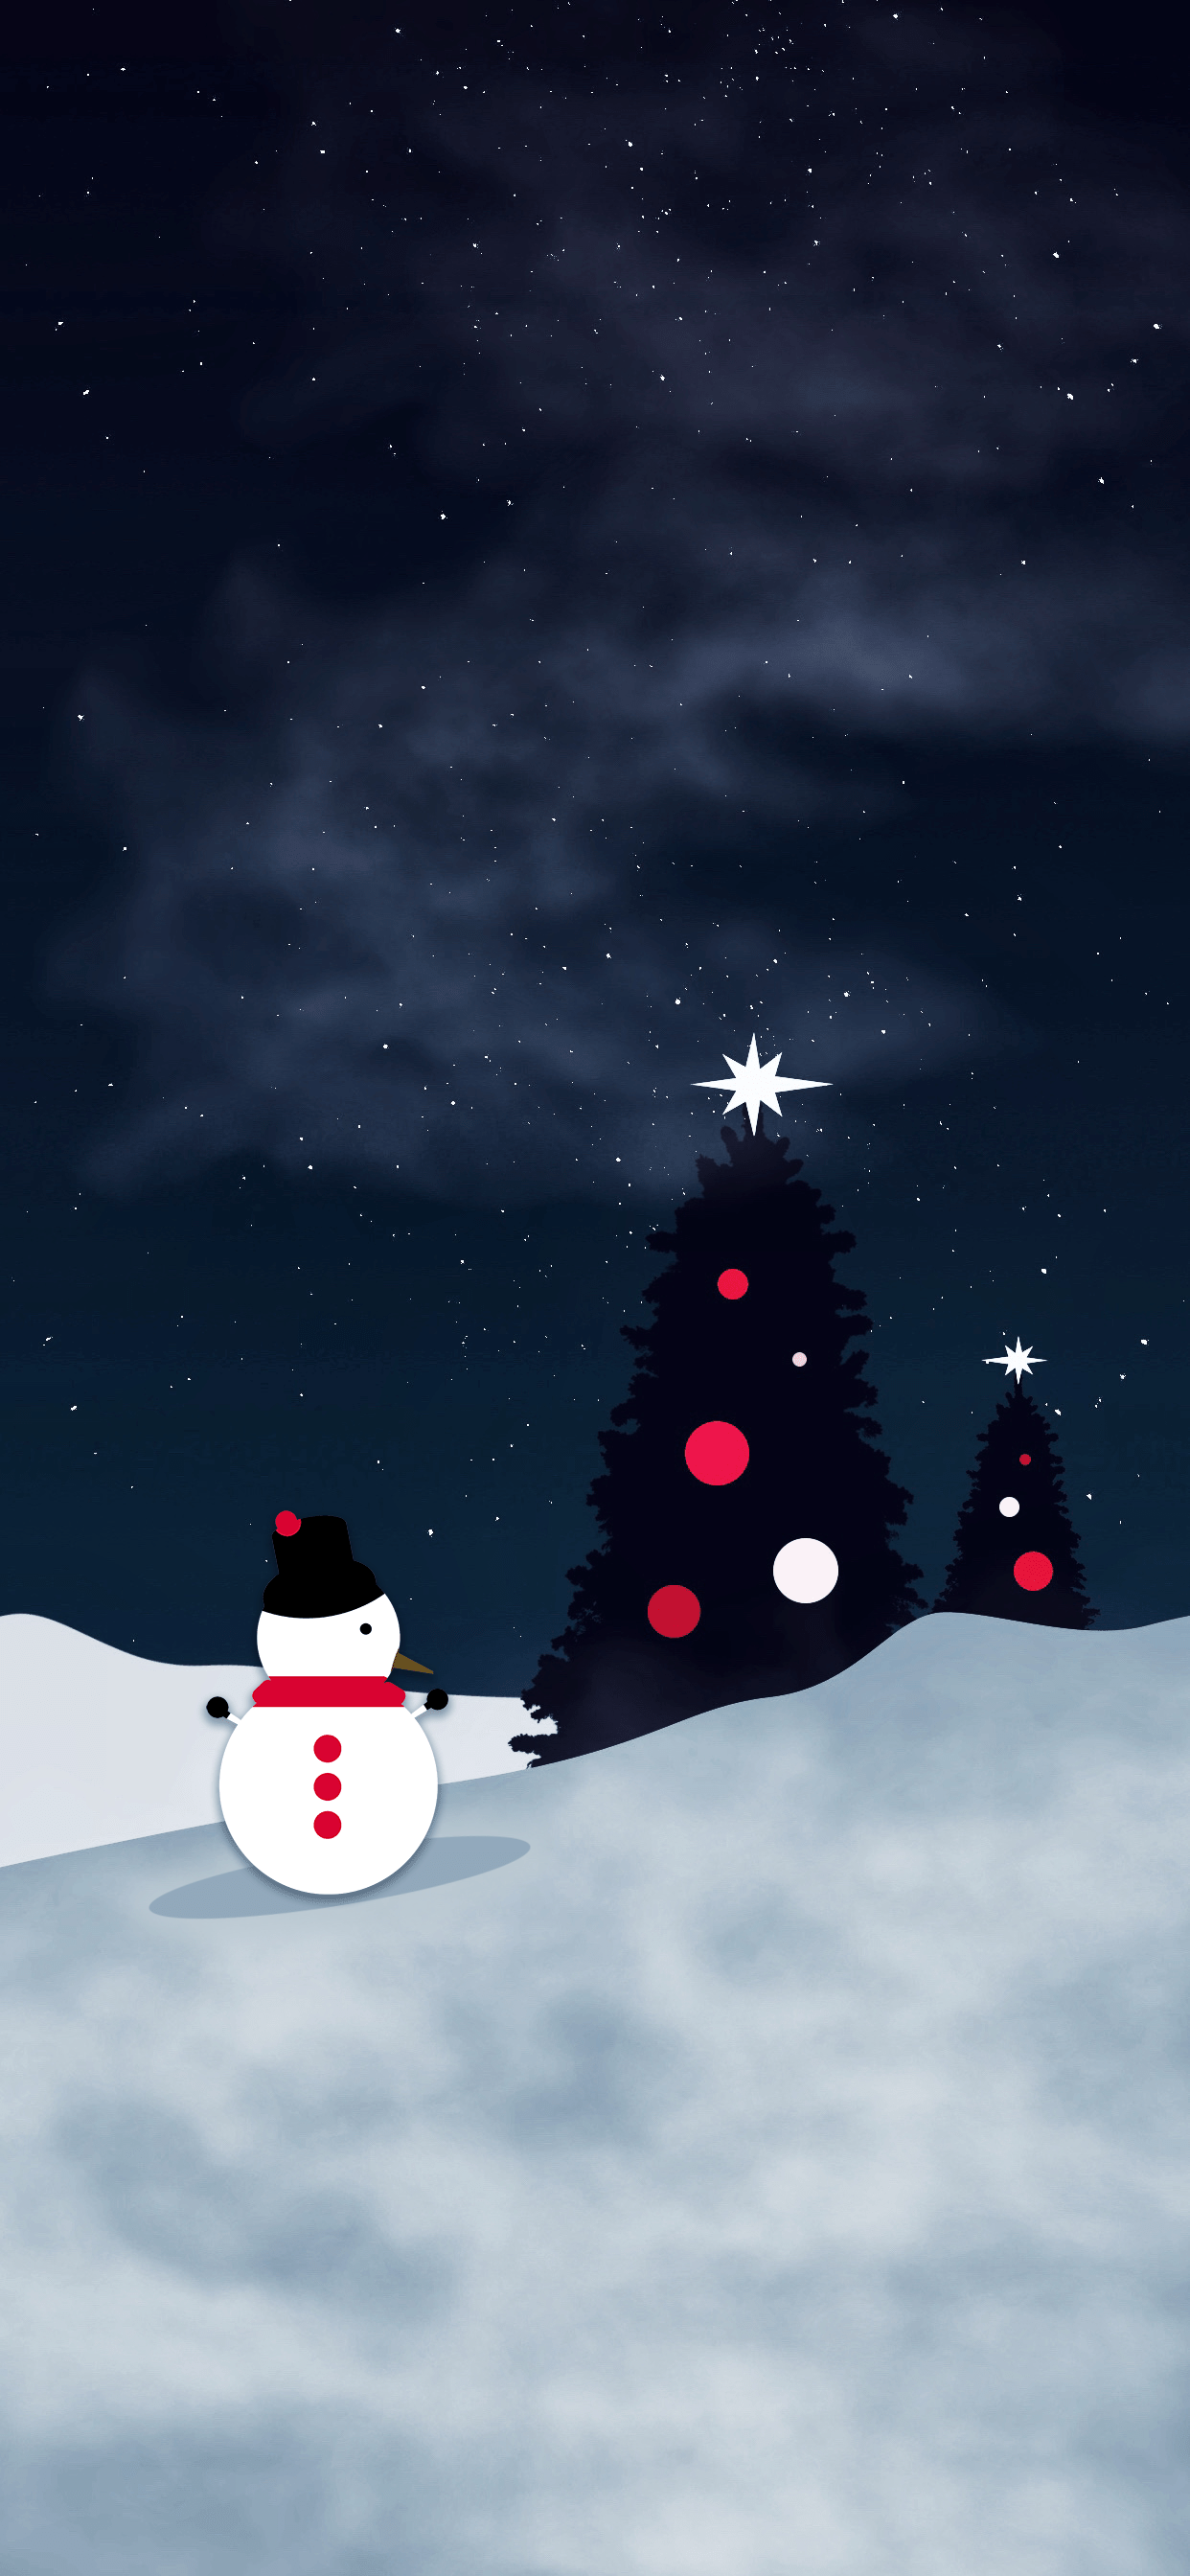 A snowman standing in a snowy field with a Christmas tree in the background. - White Christmas